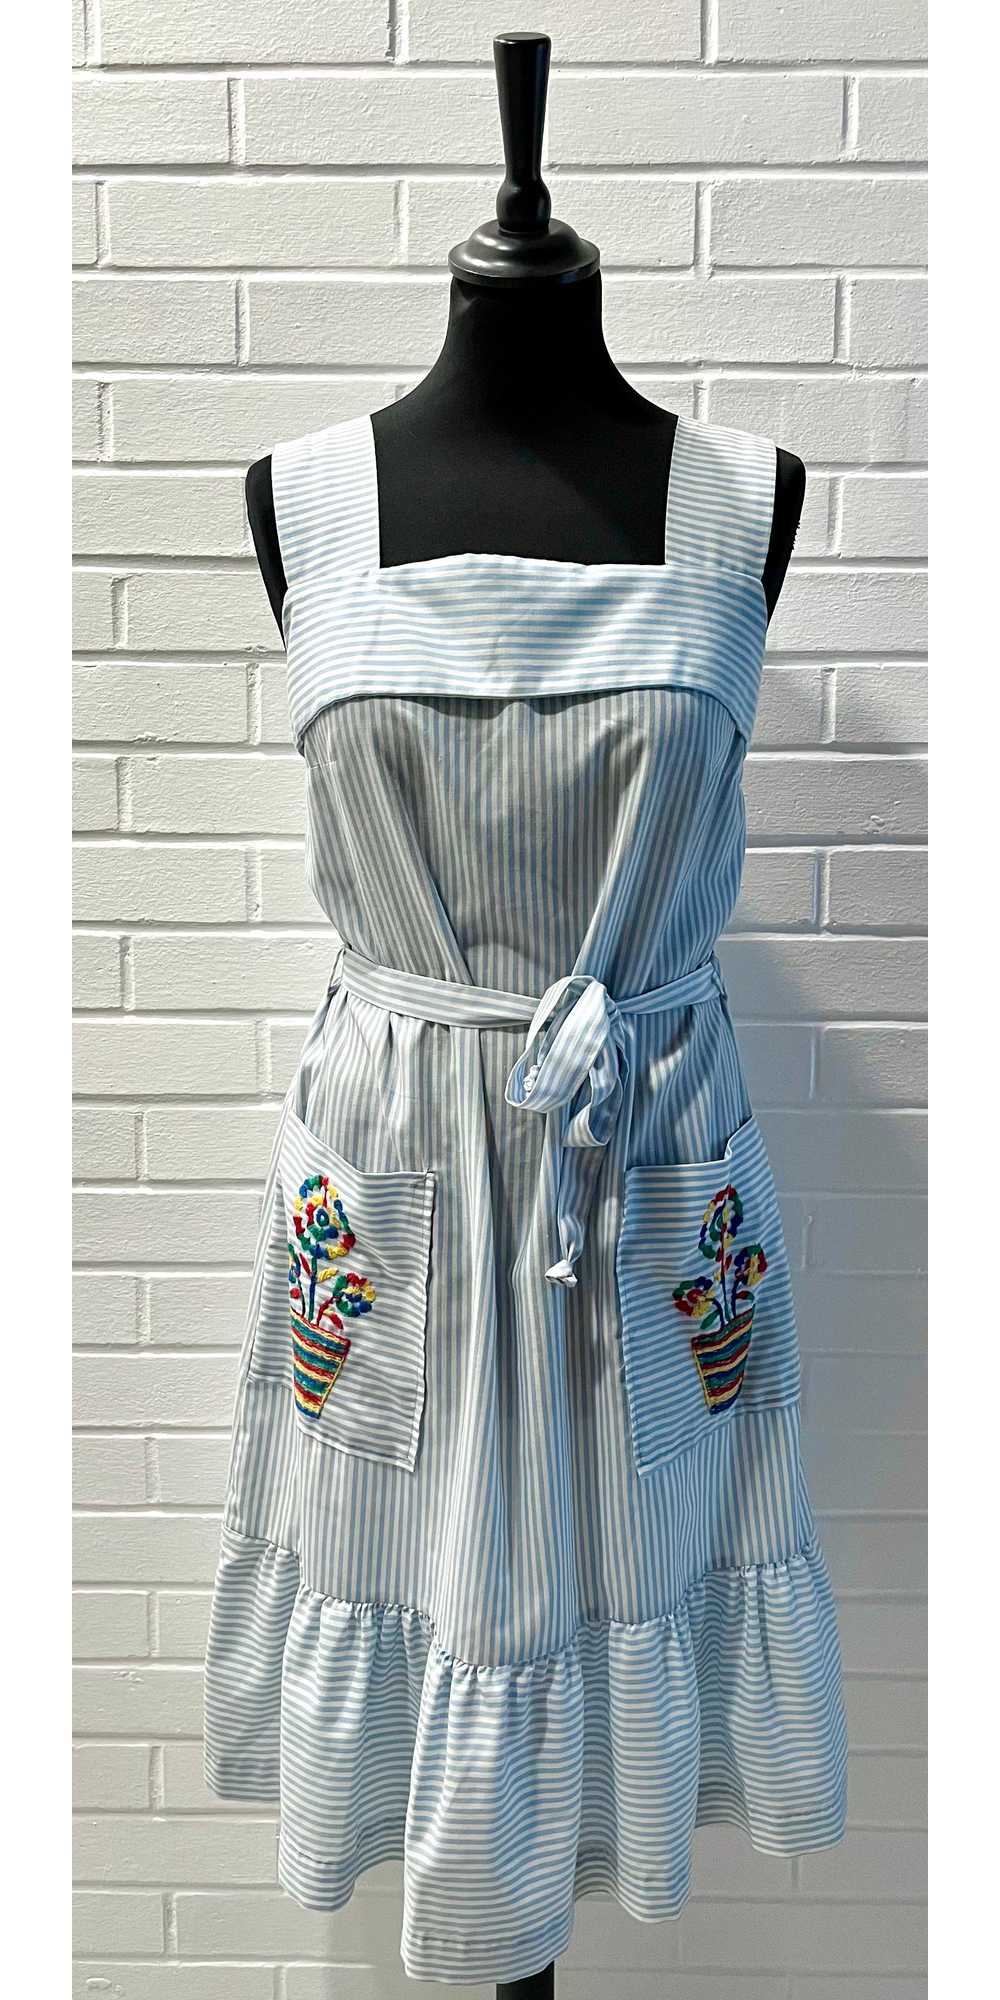 1960s Striped Embroidered Sundress/ Housedress - image 1